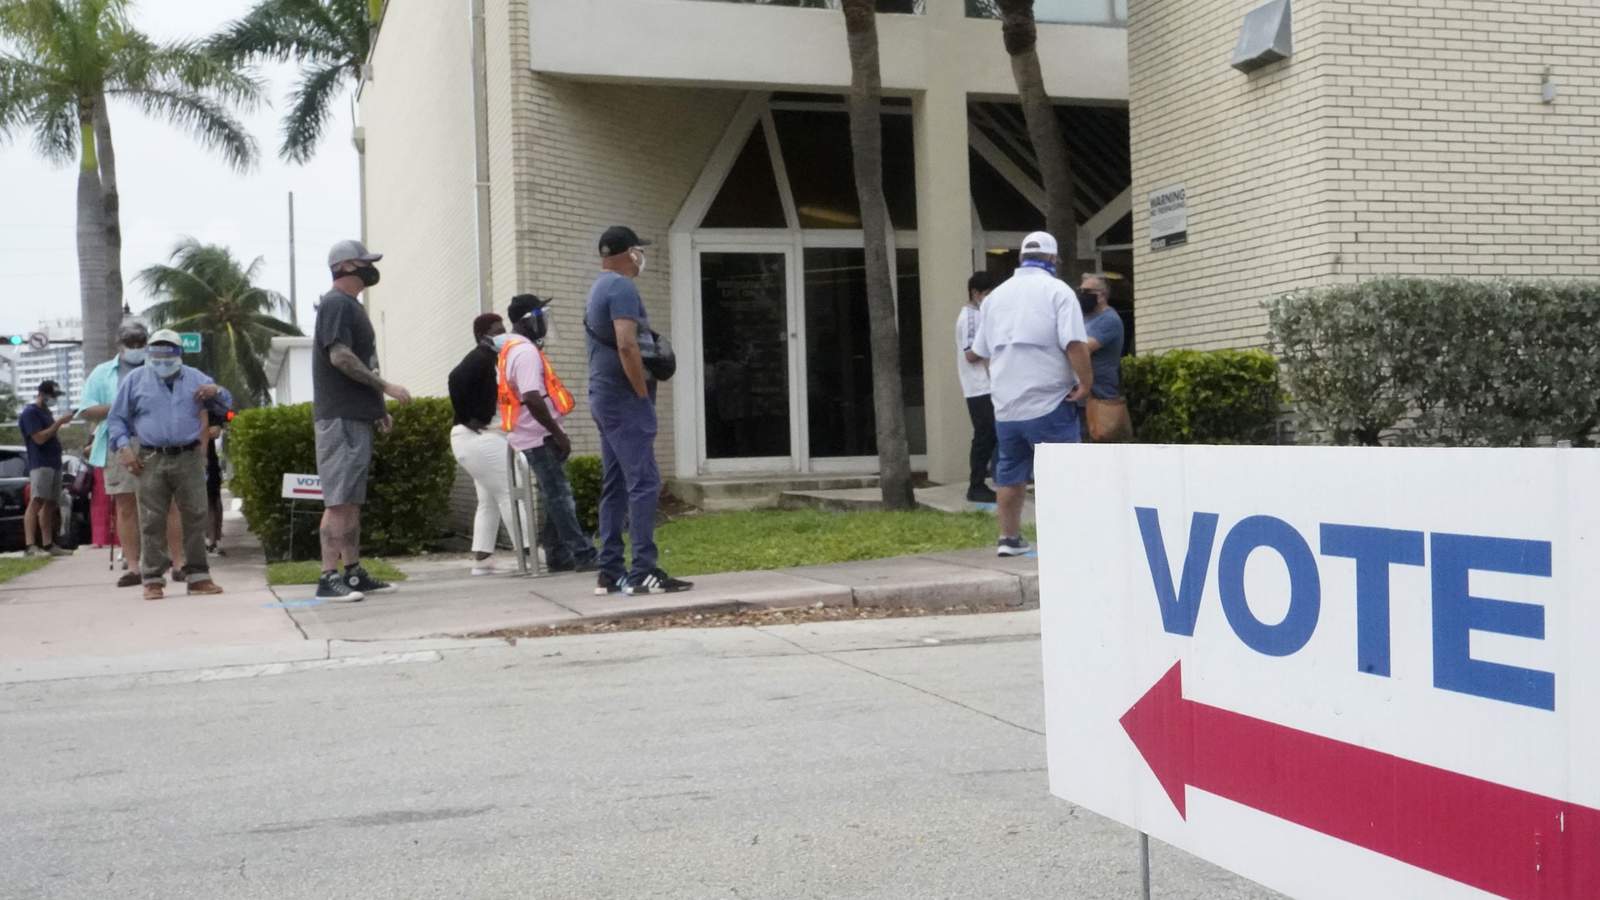 6 million Floridians have voted 10 days out from ‘Election Day'